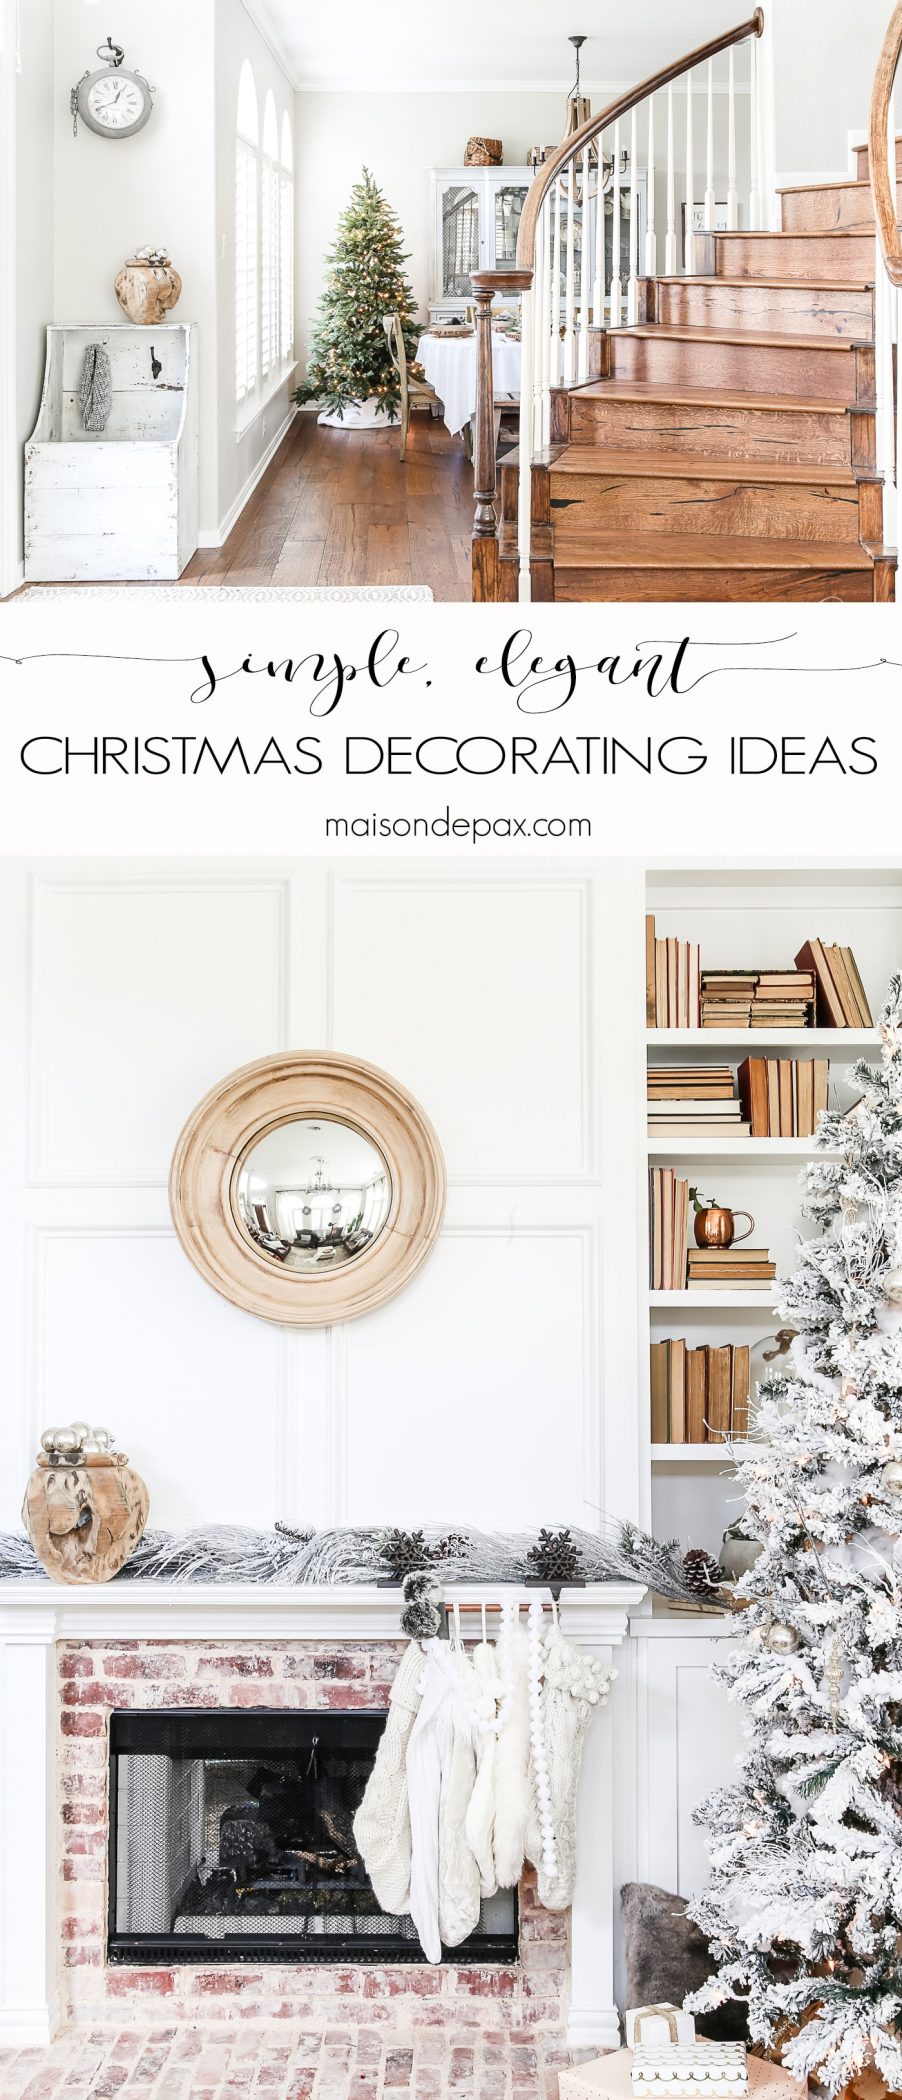 Looking for simple, elegant holiday decor ideas?  These 10 tips will help you turn your home into a modern, classy, winter wonderland. #christmasdecor